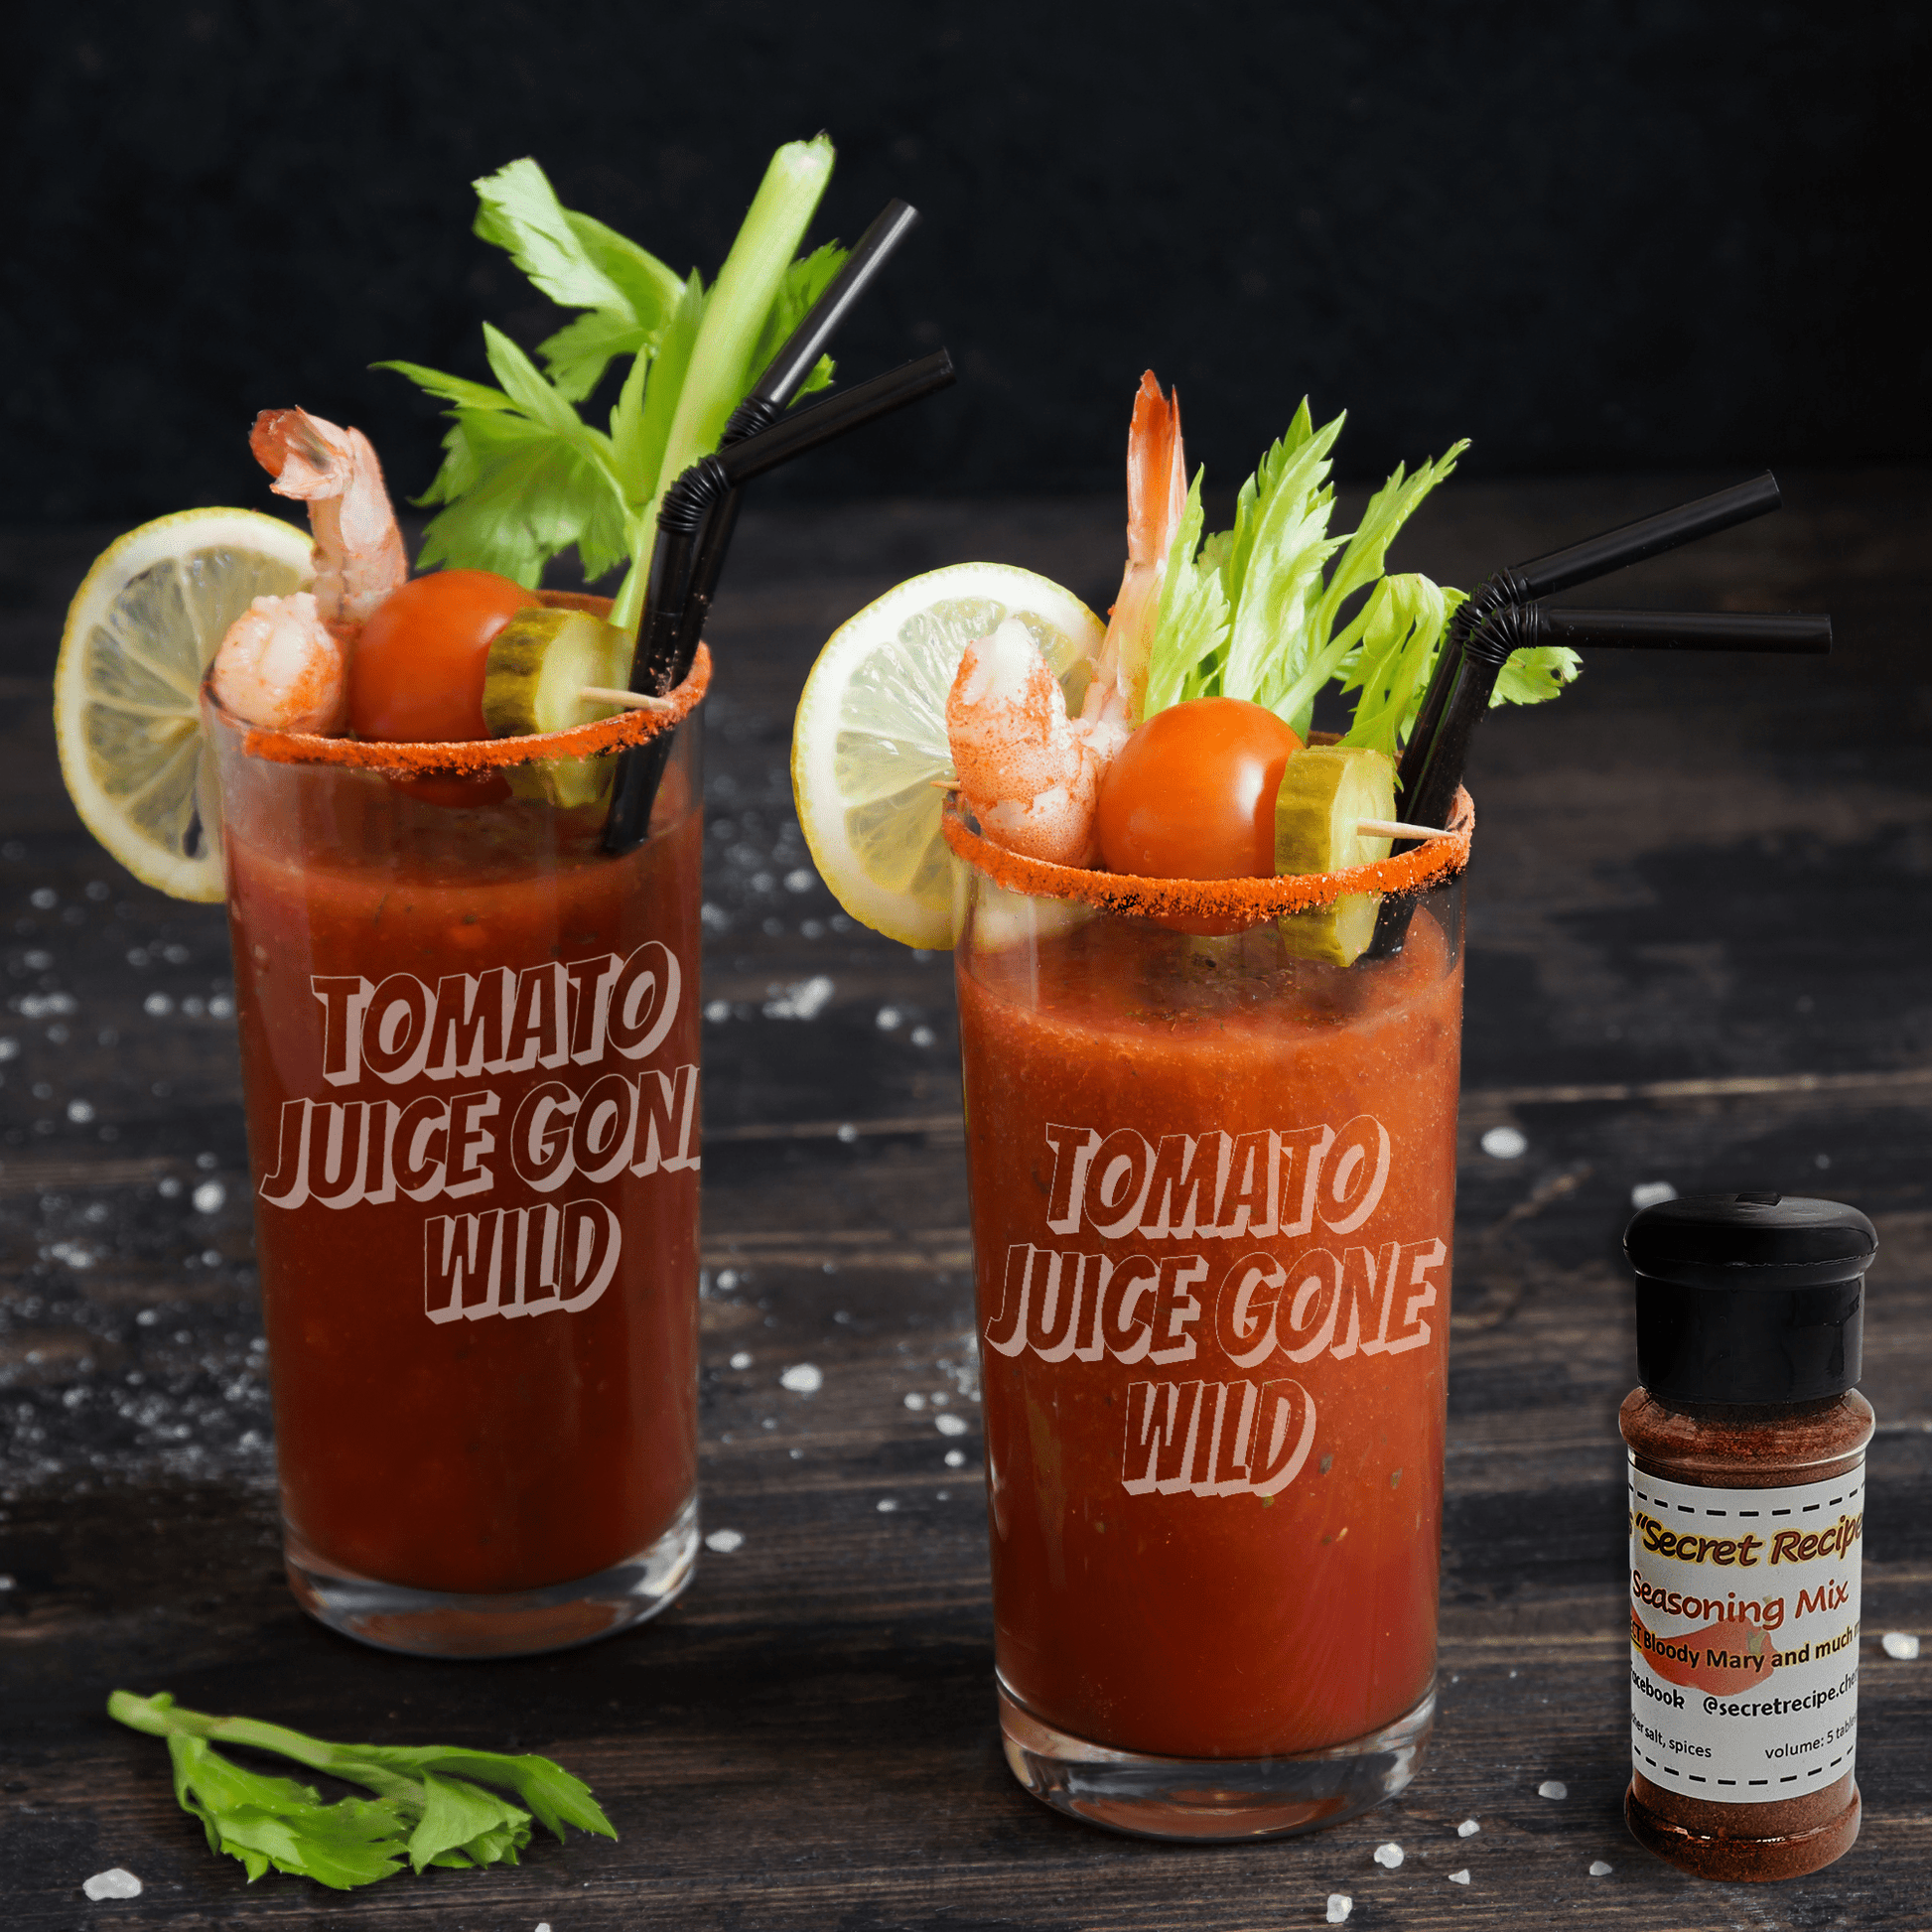 Etched Engraved 16oz Pint Glass with "Tomato Juice Gone Wild" Bloody Mary Glass - Expressive DeZien 